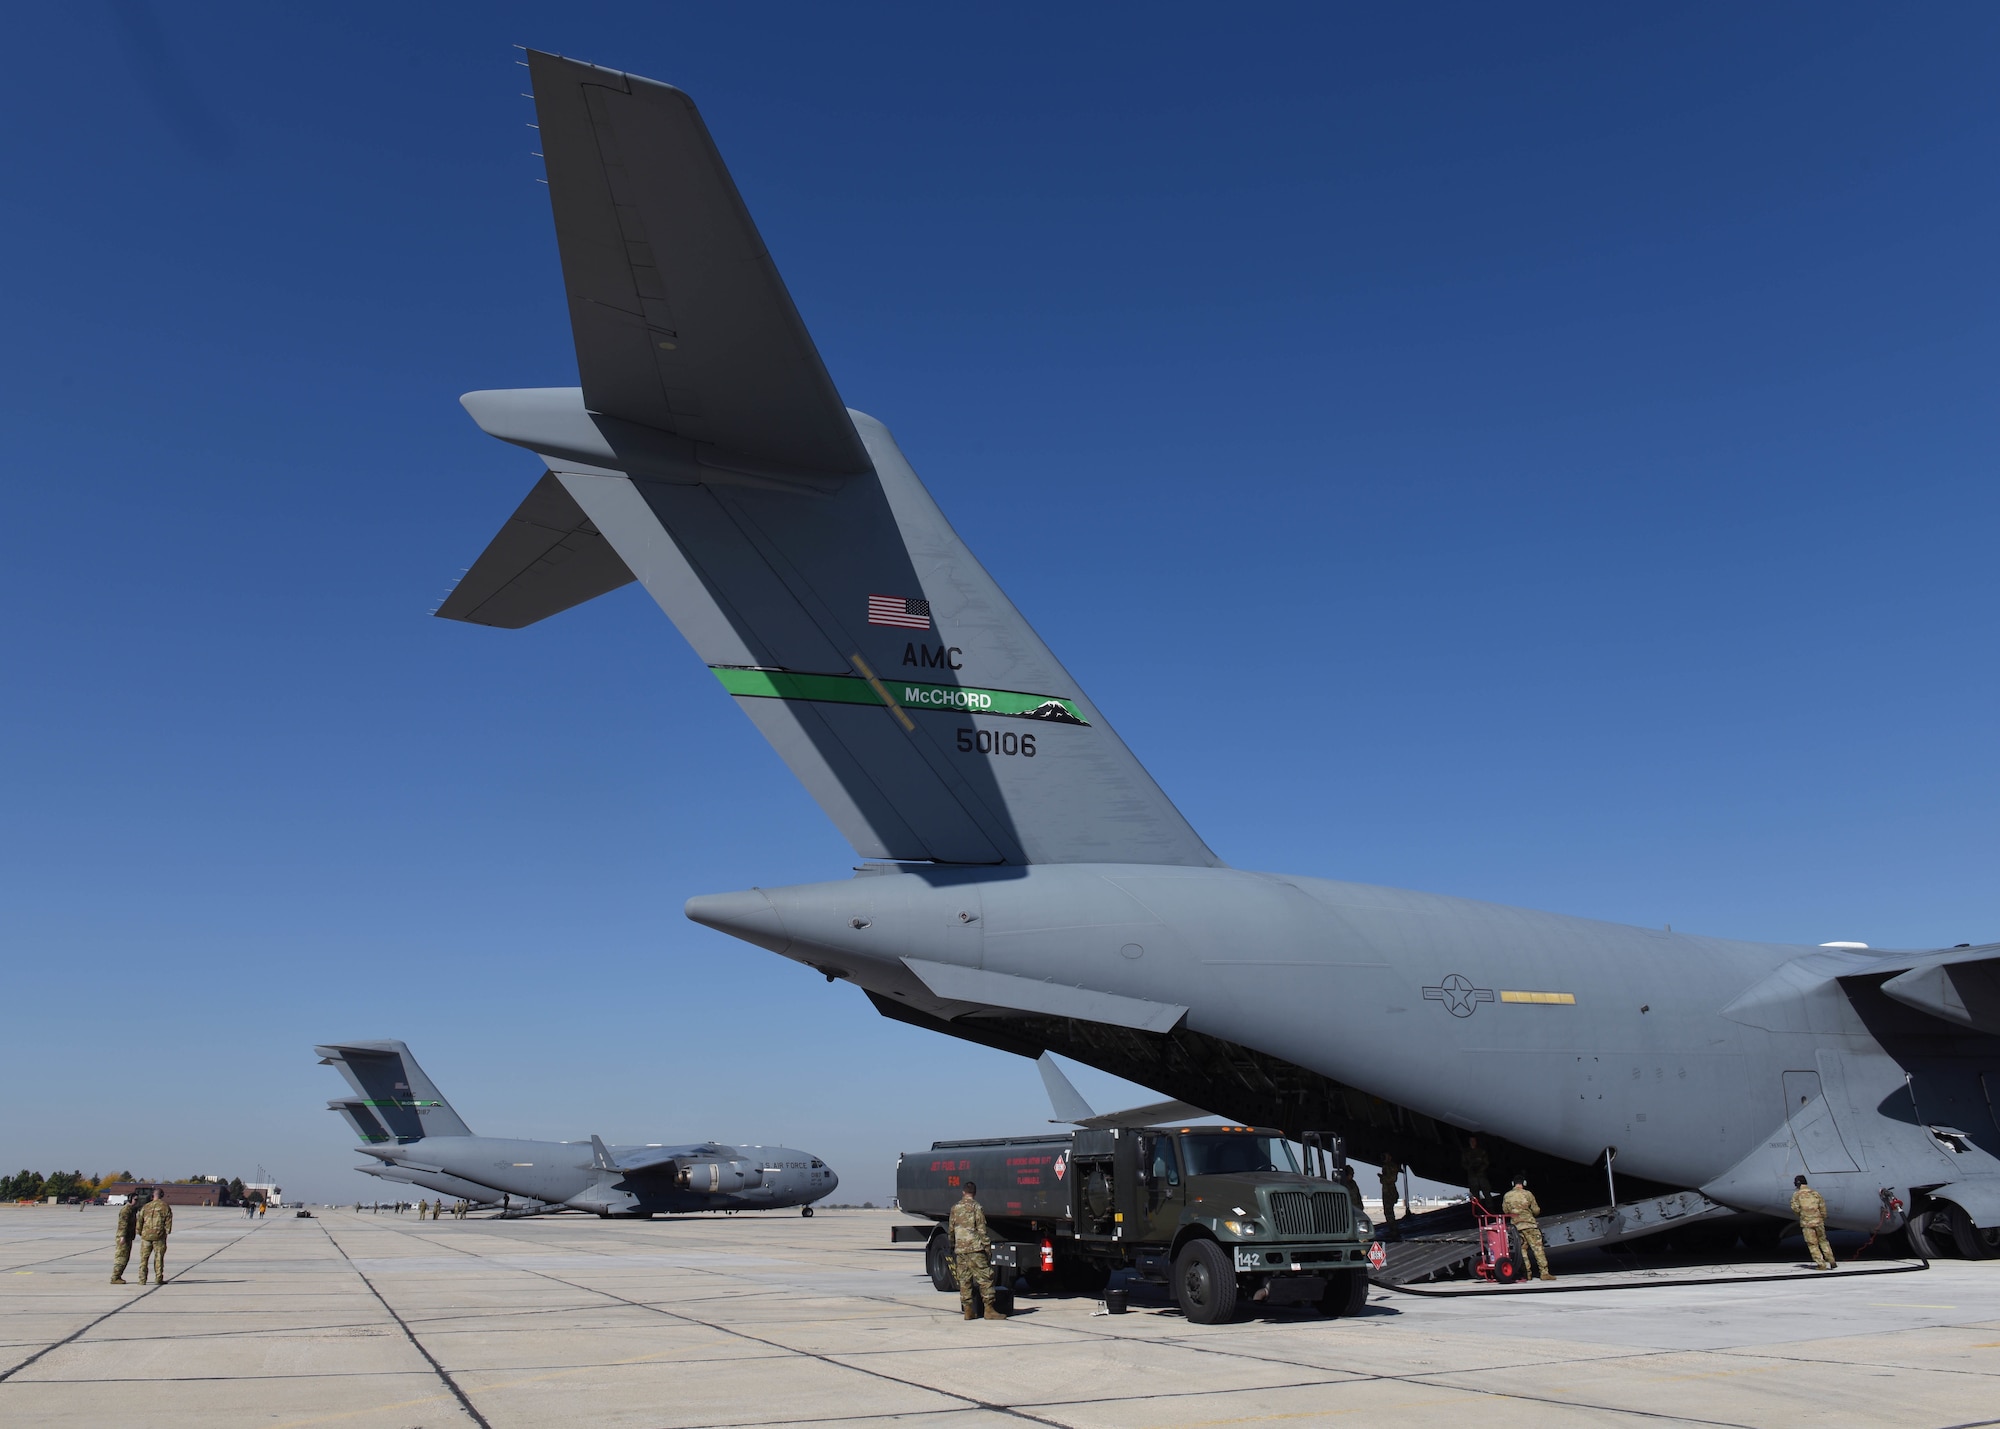 U.S. Airmen with the 62d Airlift Wing and 627th Air Base group perform wet wing refueling operations during Exercise Rainier War 22B at Gowen Field, Boise, Idaho, Oct. 20, 2022. Special fueling operations were conducted by the 62d AW’s C-17 Globemaster III and the 366th Fighter Wing’s F-15E Strike Eagle aircraft during Rainier War 22B to exhibit Air Mobility Command’s agile combat capabilities. (U.S. Air Force photo by Staff Sgt. Zoe Thacker)